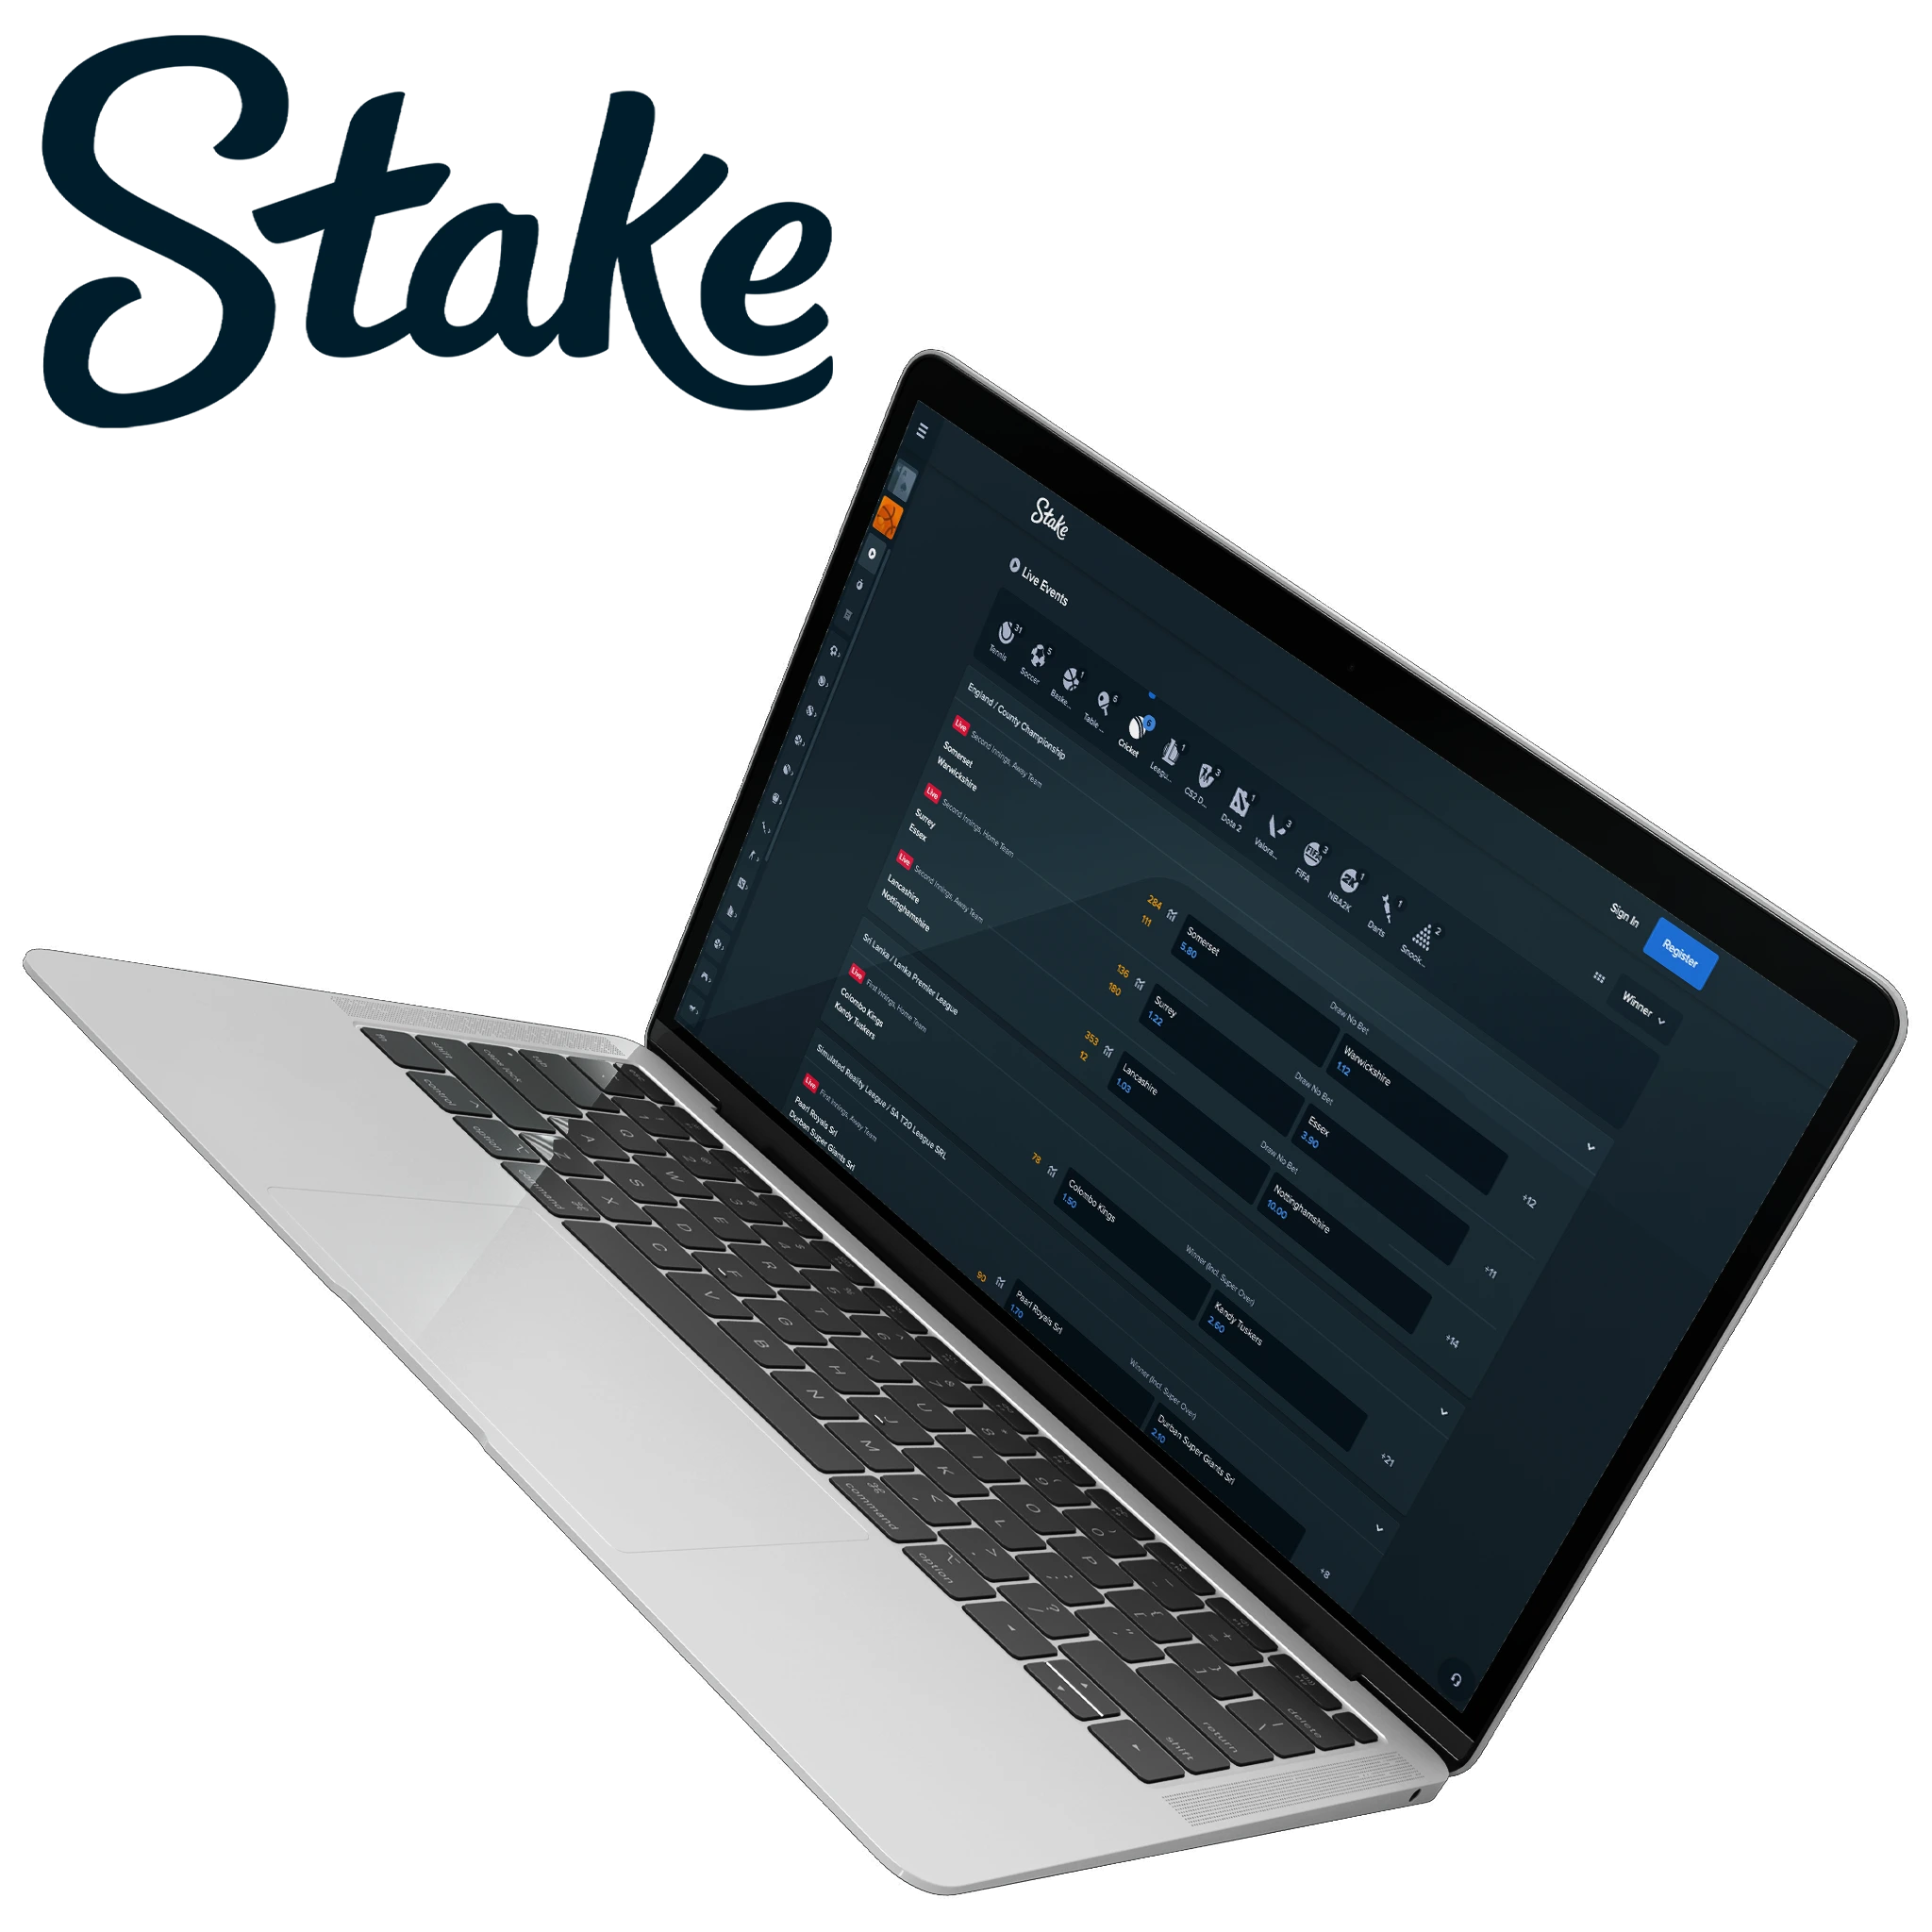 Stake is the best gambling platform for live cricket betting. 